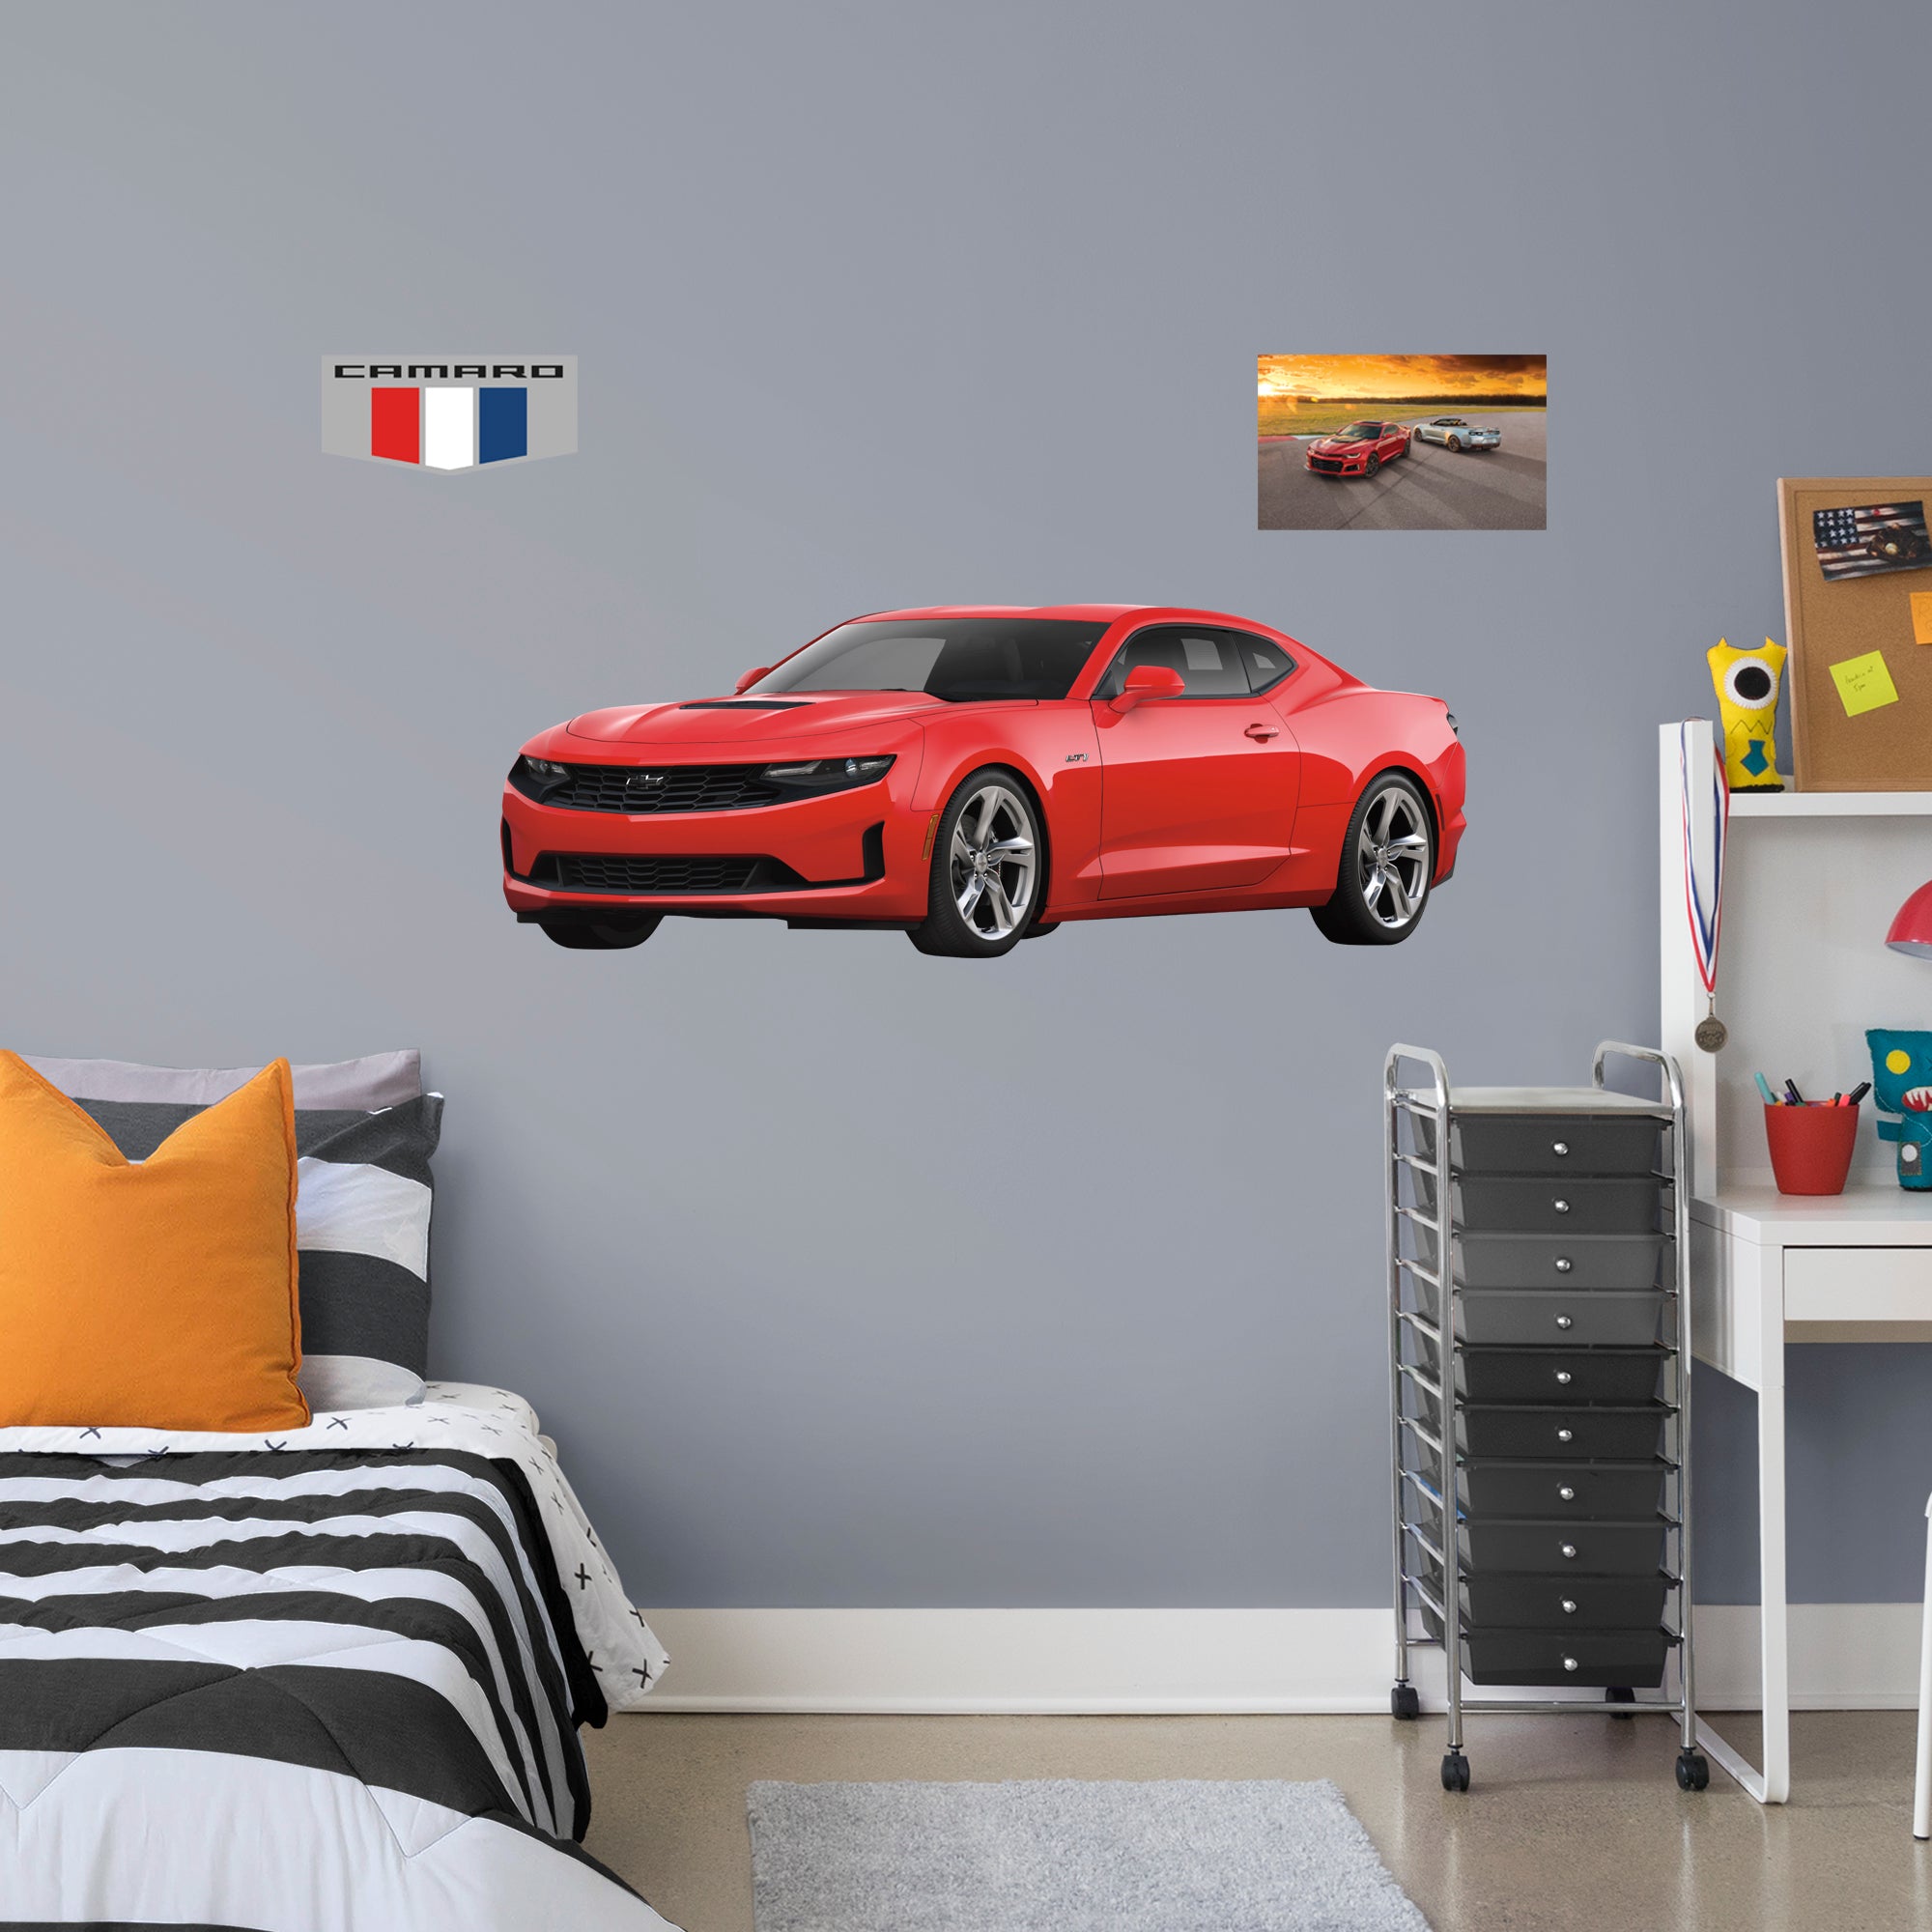 Chevrolet Red Camaro: Officially Licensed GM Removable Wall Decal Life-Size + 2 Decals by Fathead | Vinyl